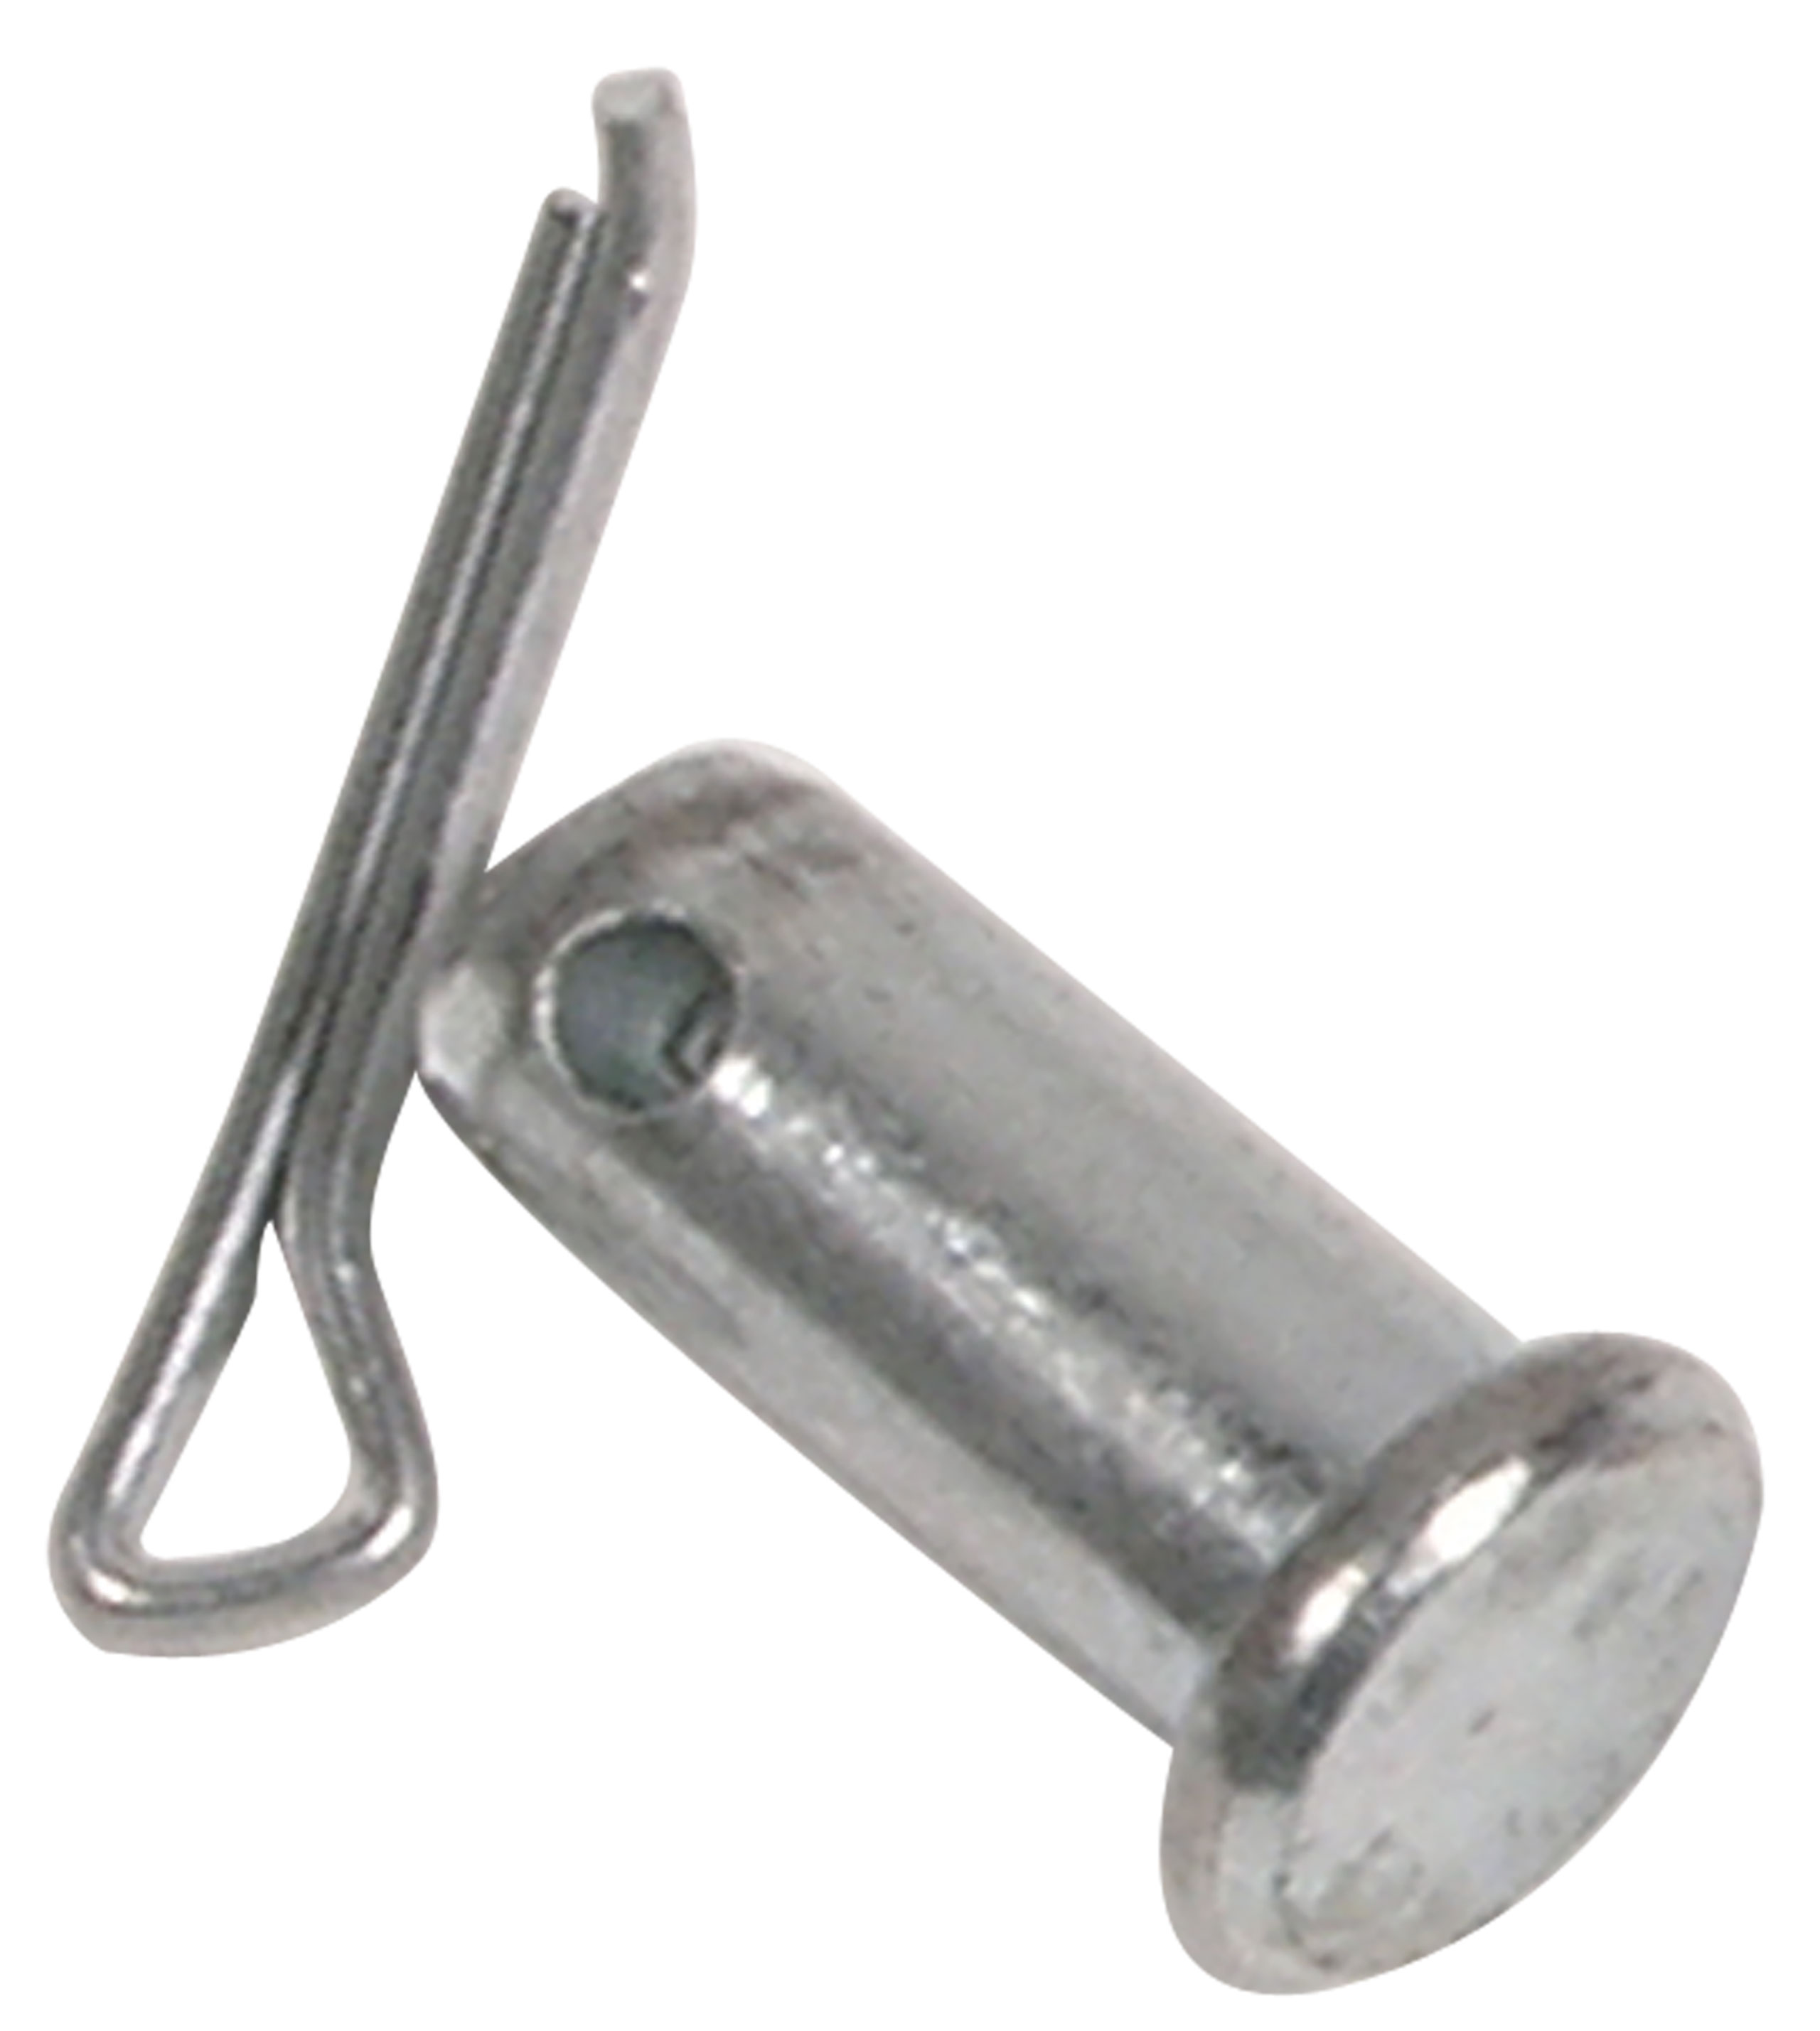 Clevis Pin - 5987J04.S